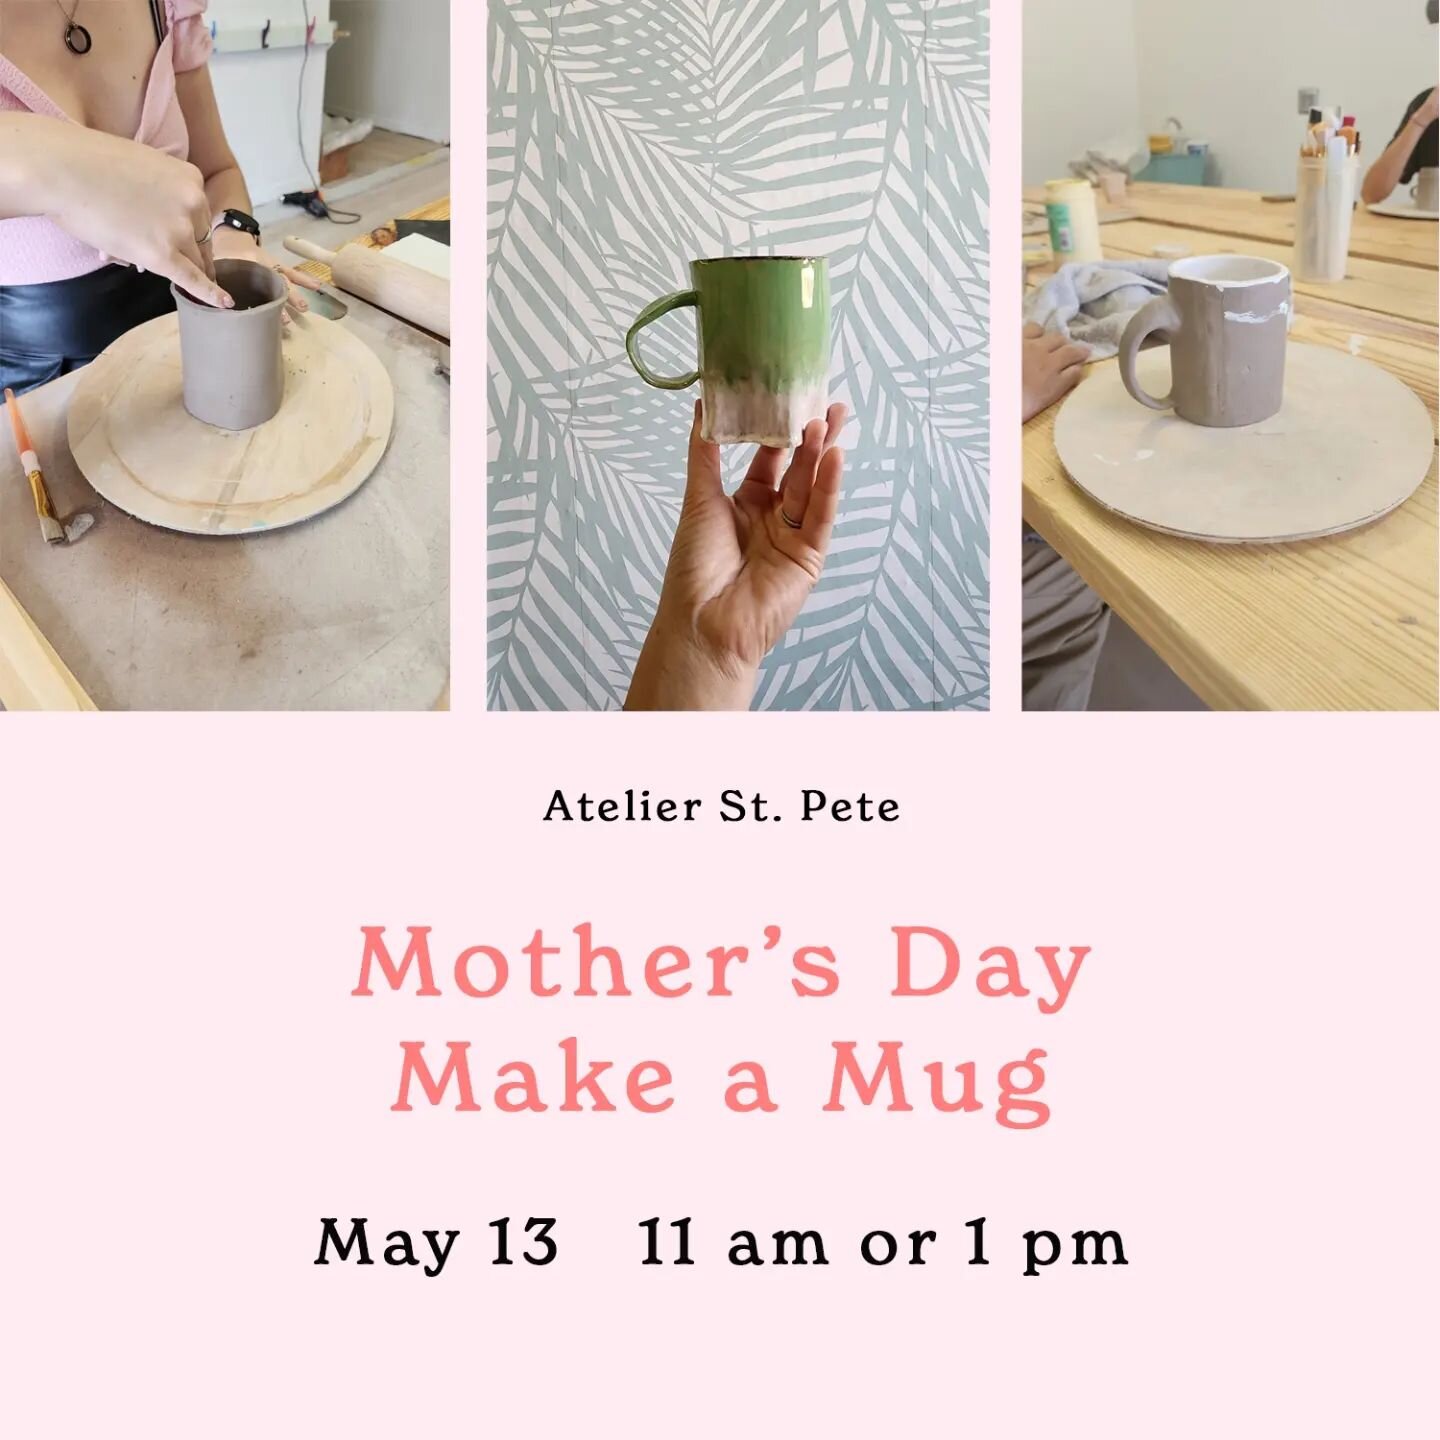 Join us for Mother's Day on May 13 and have an unforgettable experience together! 

We offer both making a mug by hand or throwing 2 bowls on the wheel. Sign up using the link in our bio.

We will finish your piece with a clear glaze and firing. They